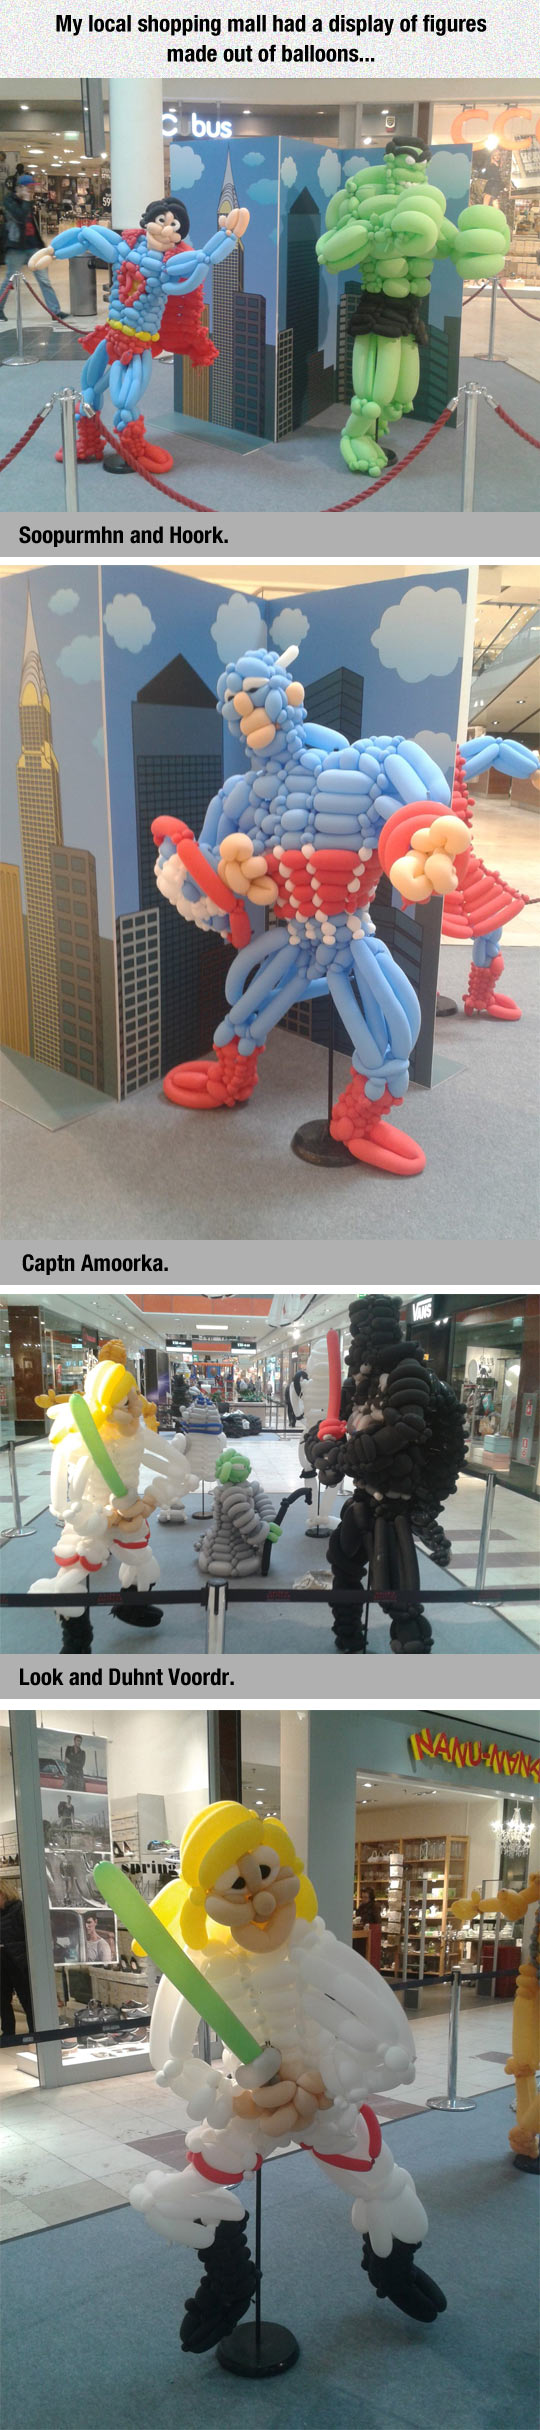 funny-figures-made-balloons-superman